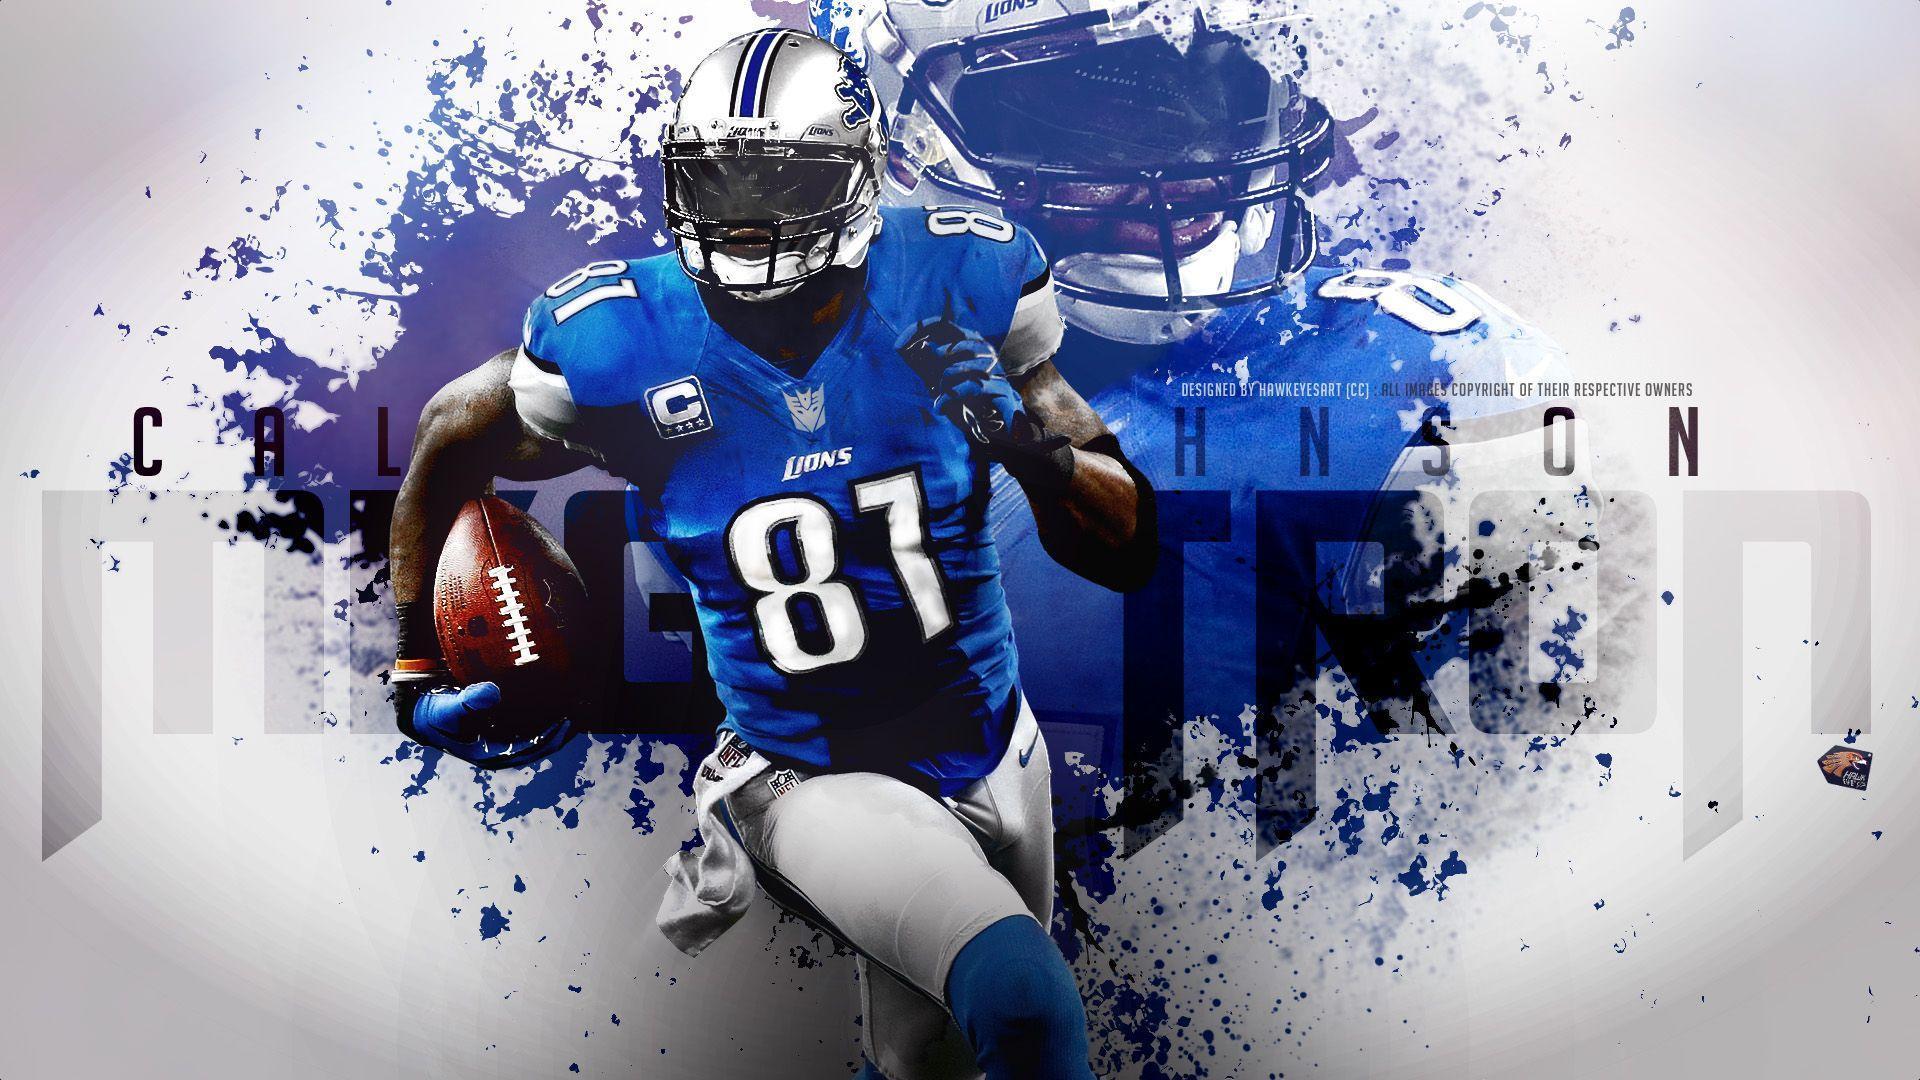 Detroit Lions Wallpaper and Background